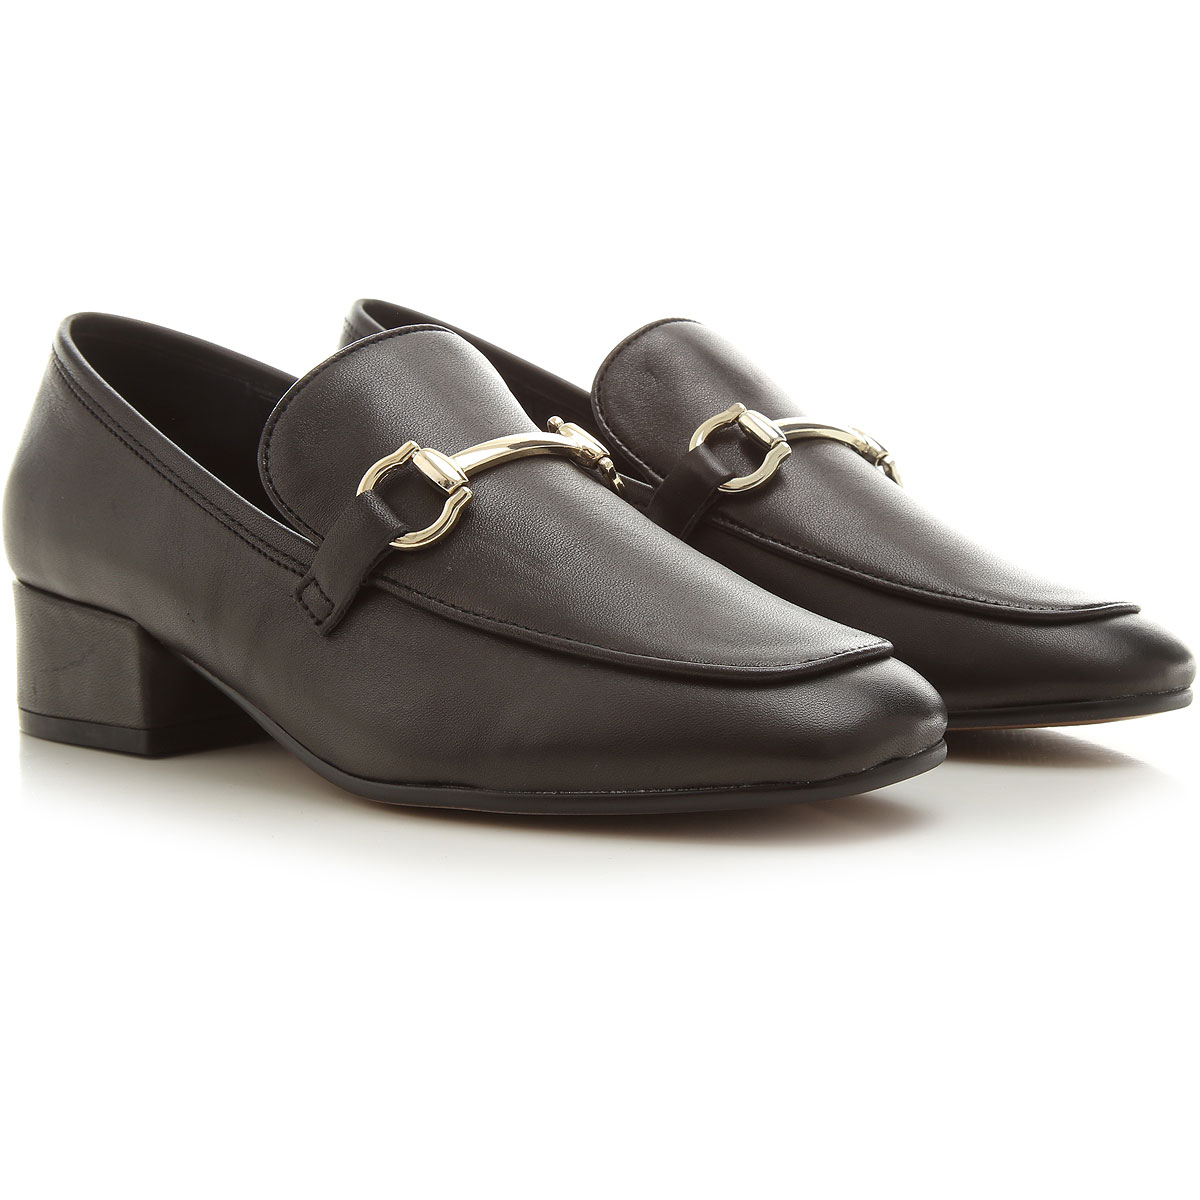 Womens Shoes Steve Madden, Style code: loafer-blk-lea